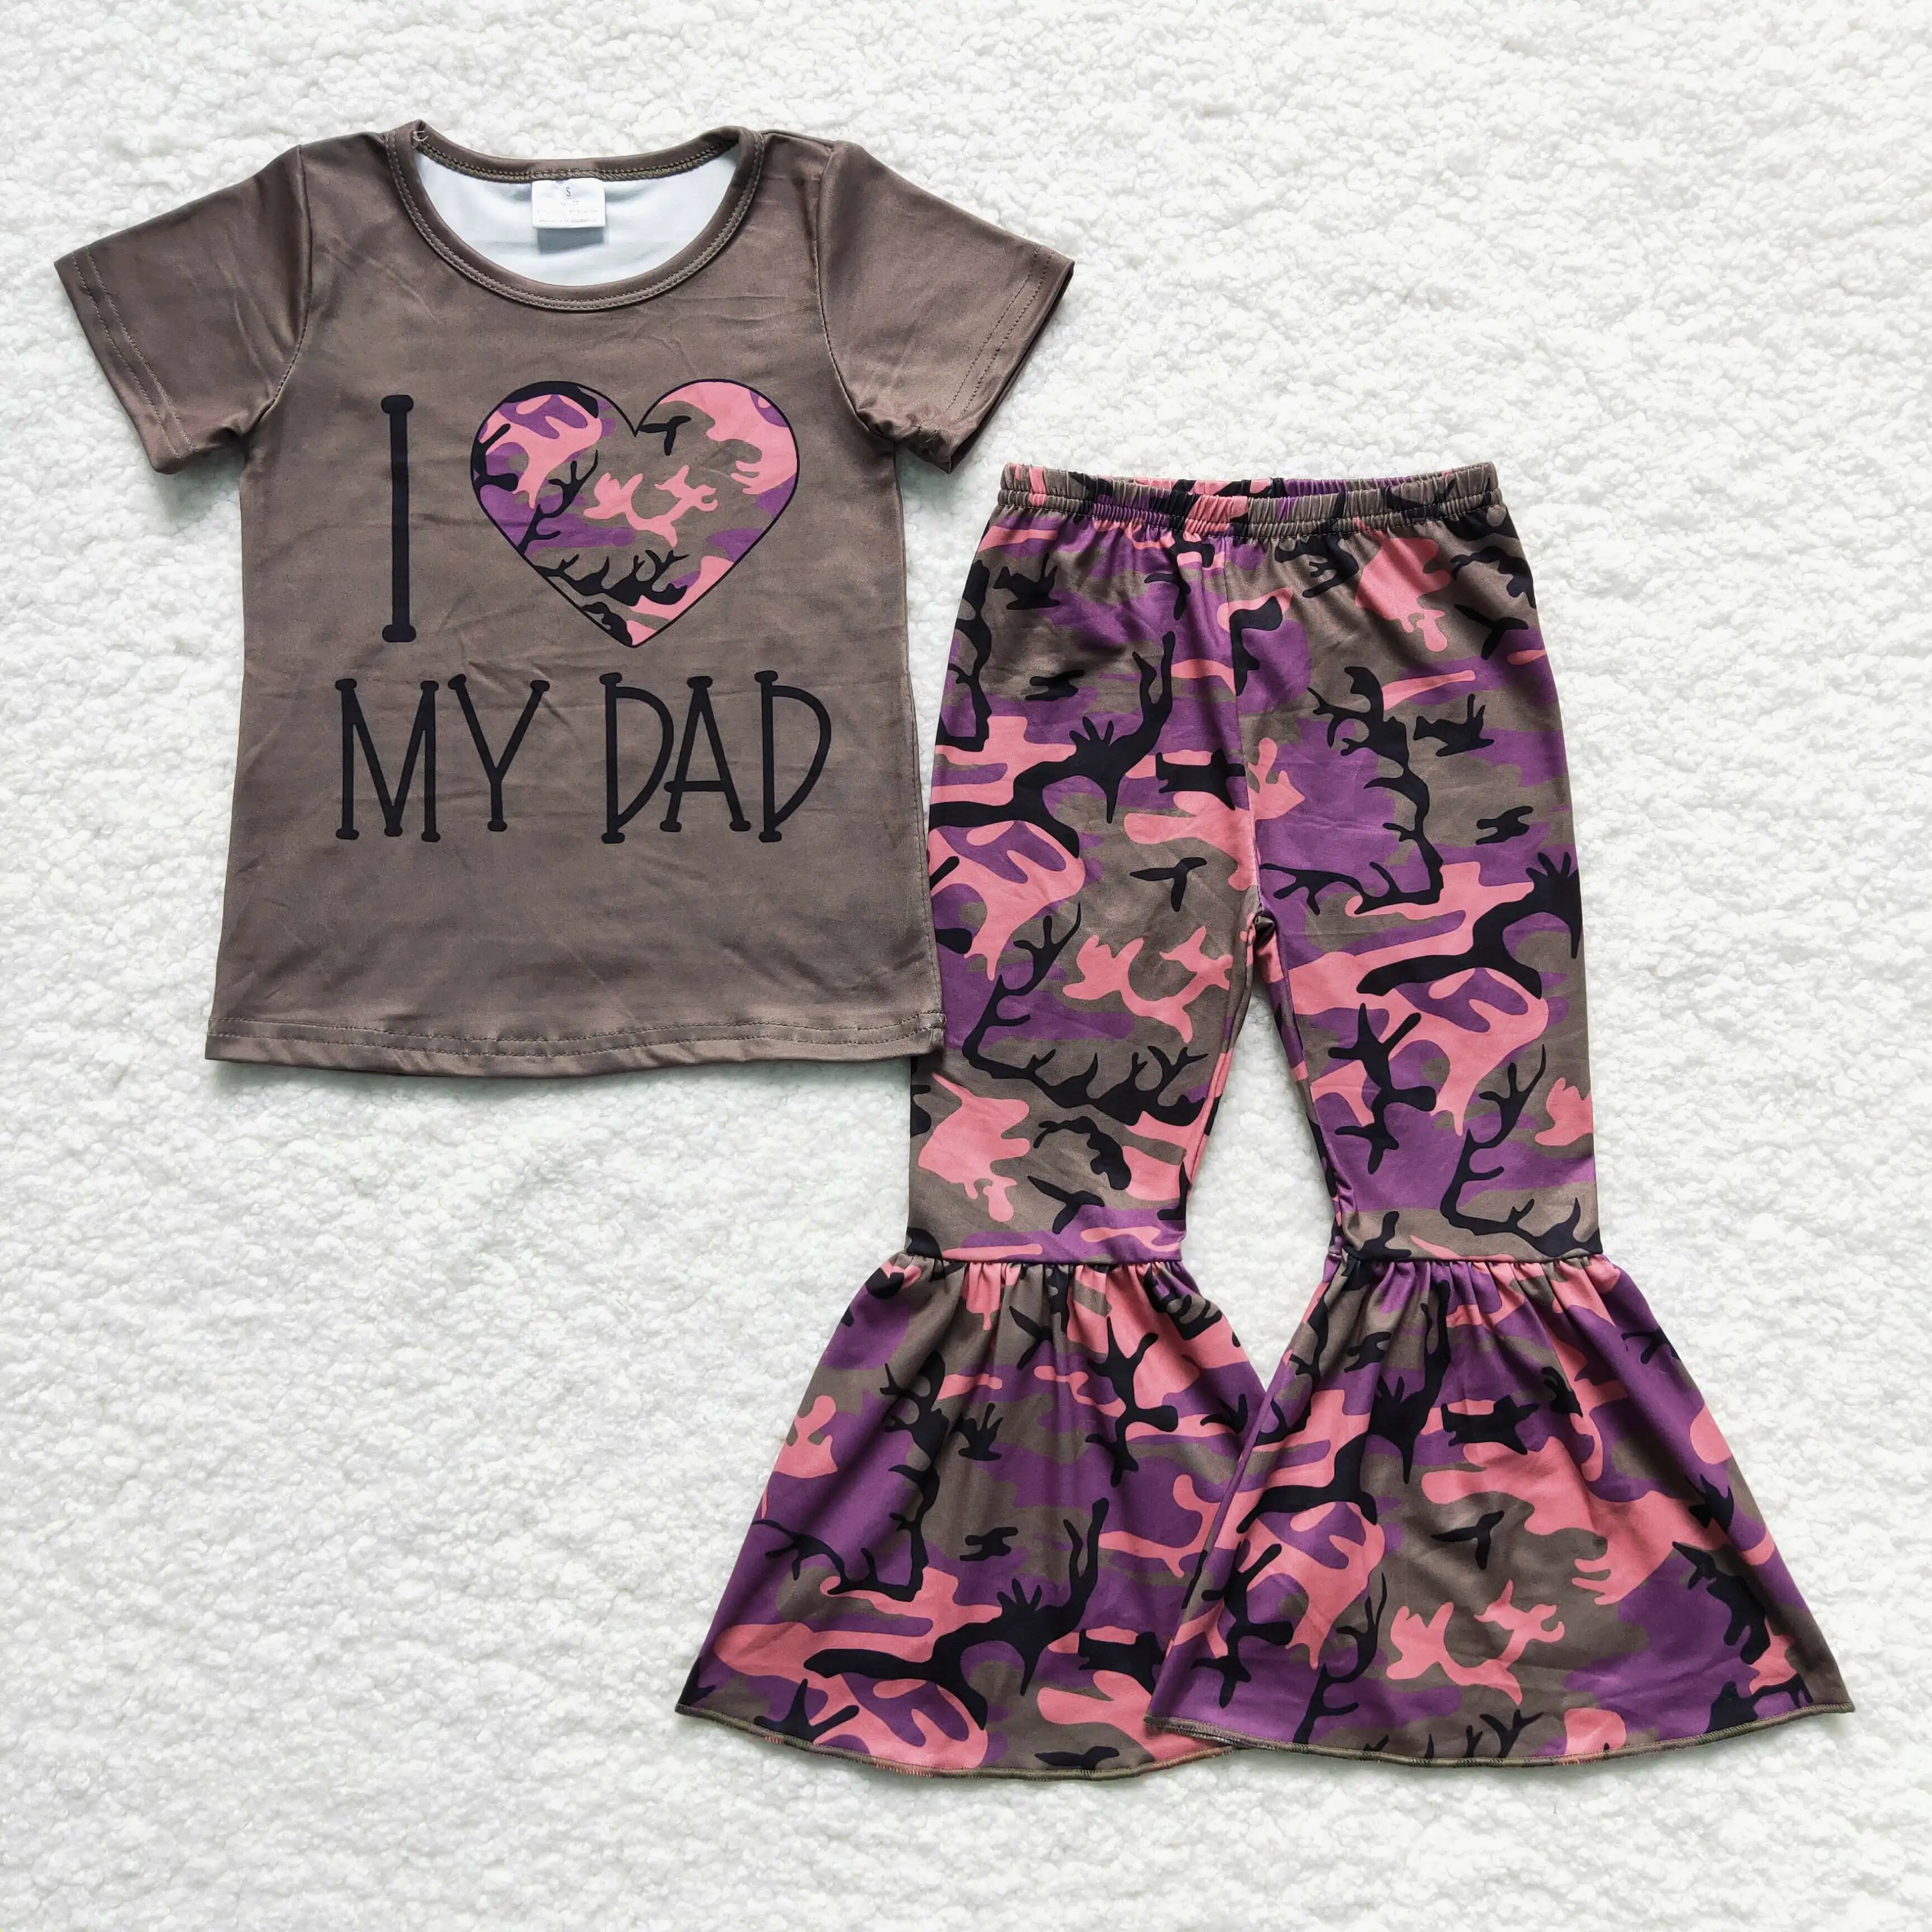 

Popular Design RTS I Love Dad Print Shirt Kids 2PCS Fancy Sets Baby Girls Camo Outfits Children's Boutique Clothing